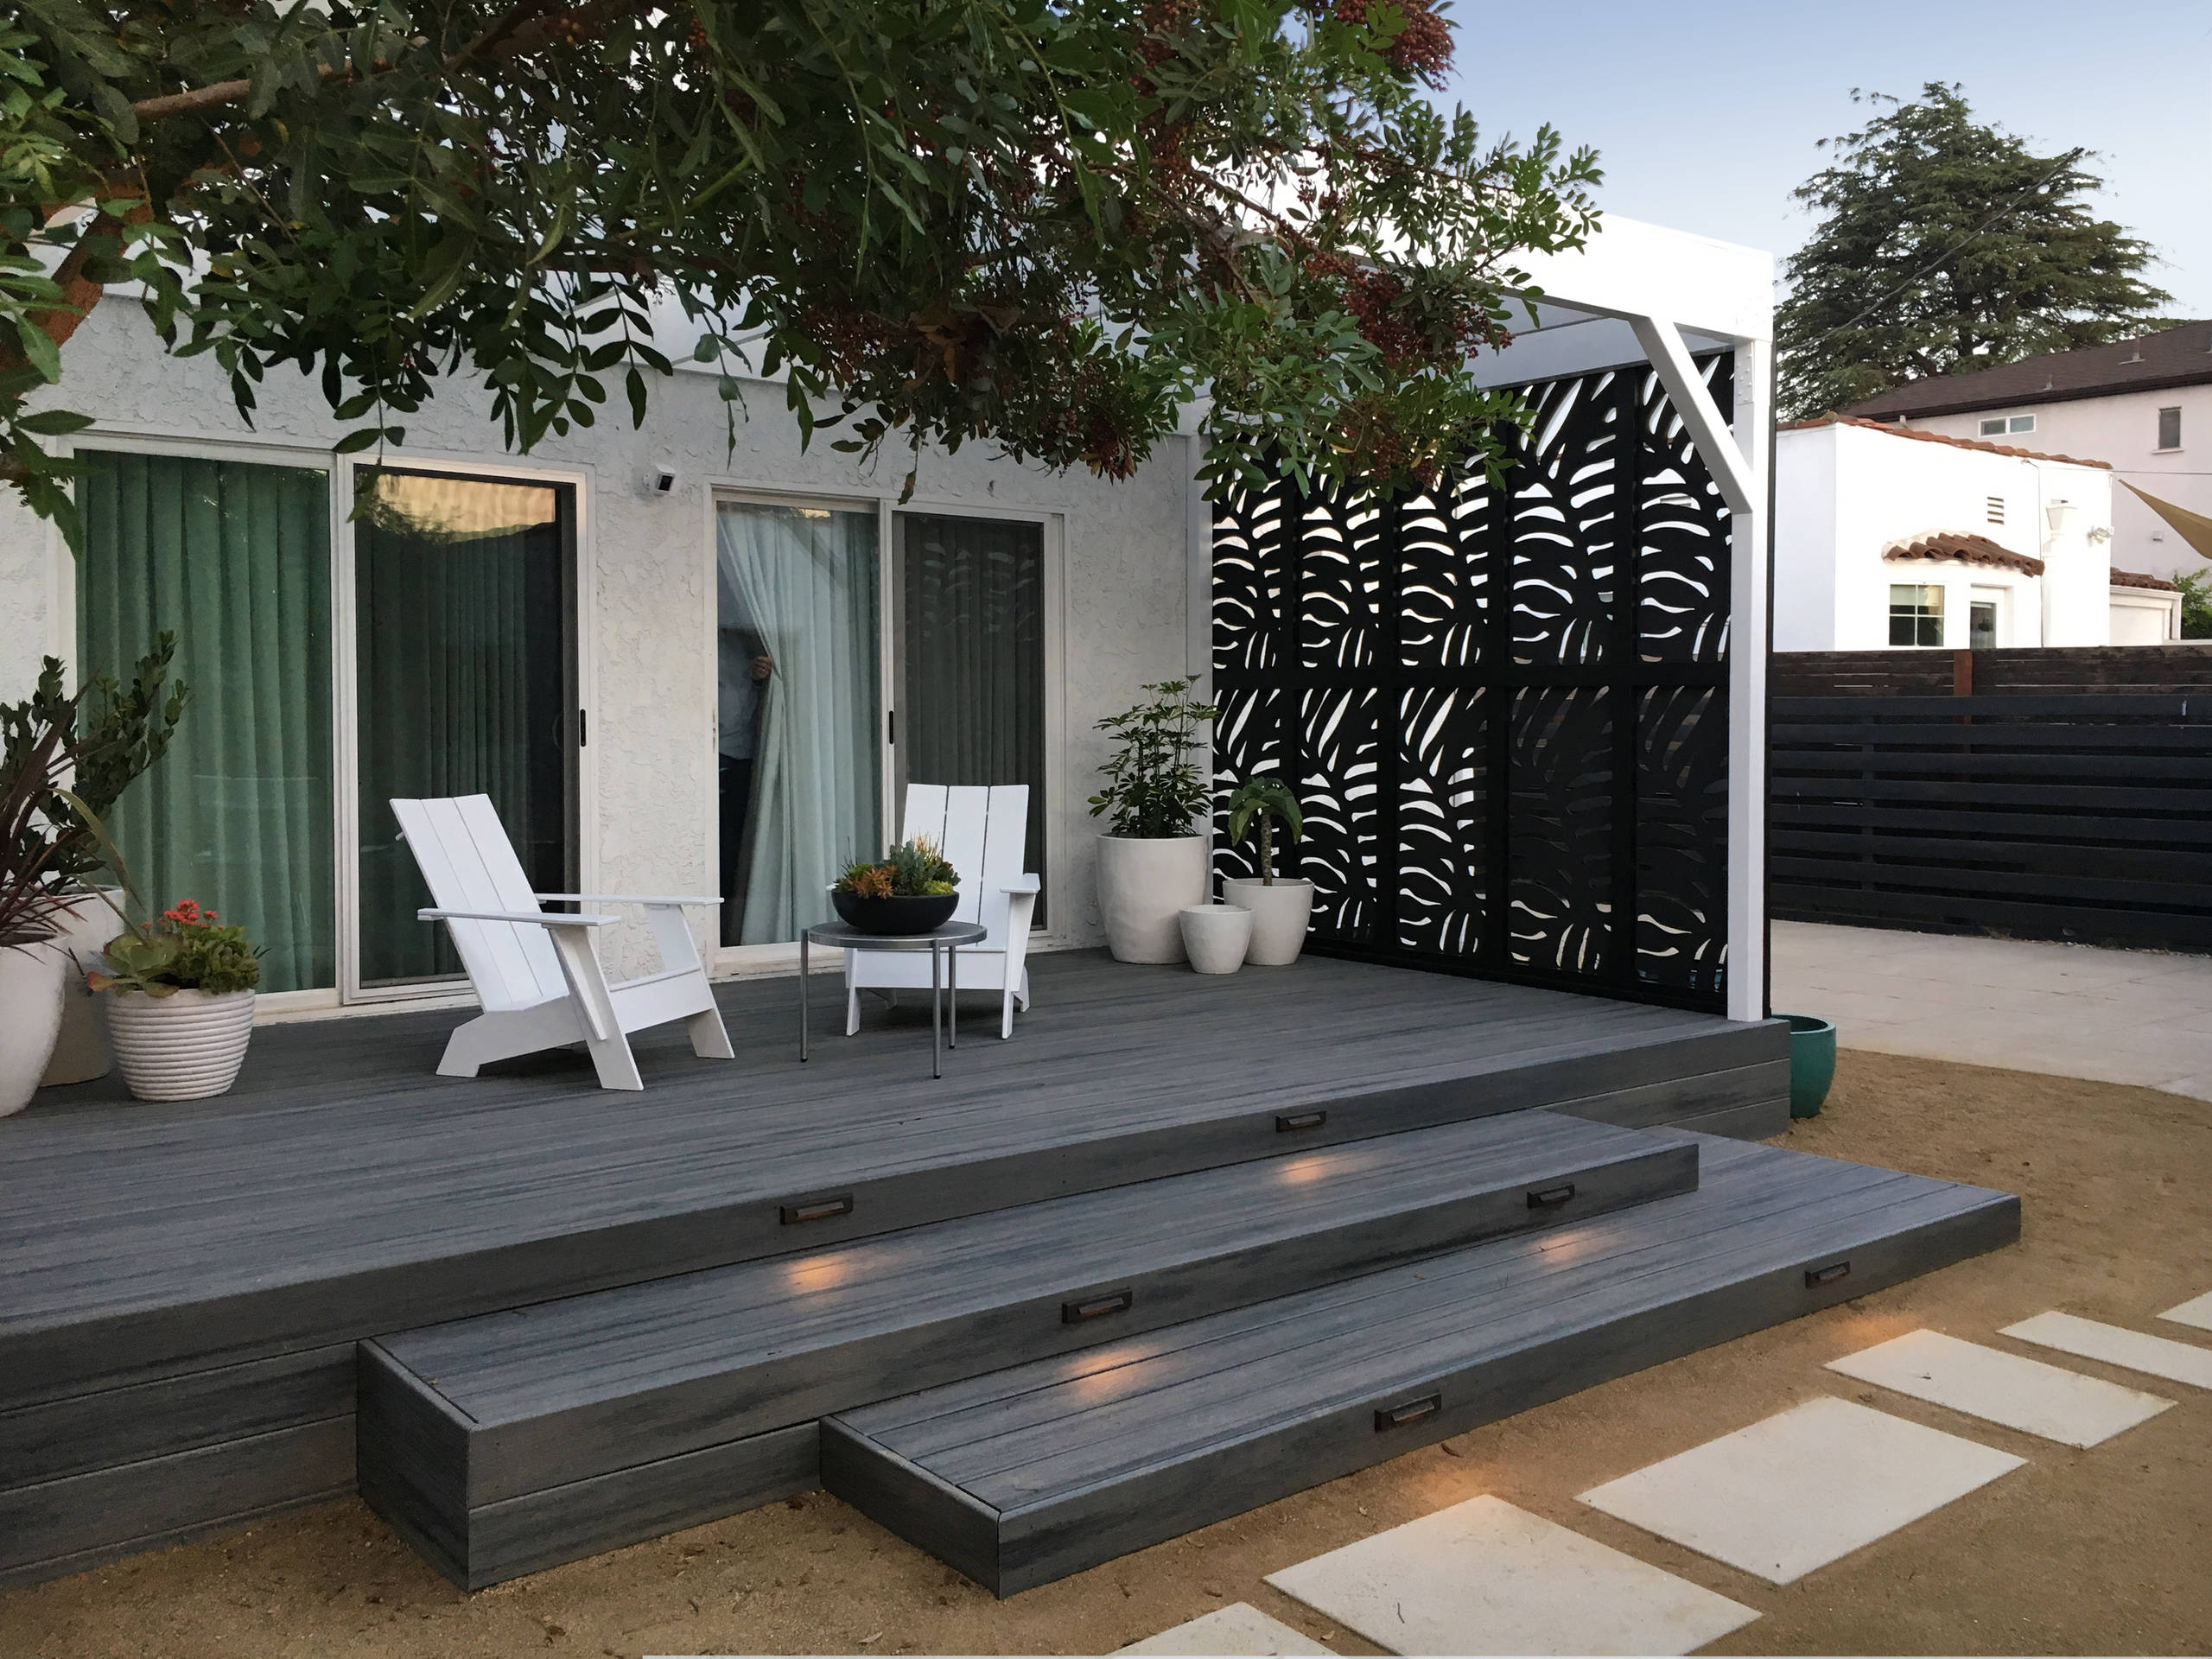 75 Small Deck Ideas You'll Love - February, 2022 | Houzz